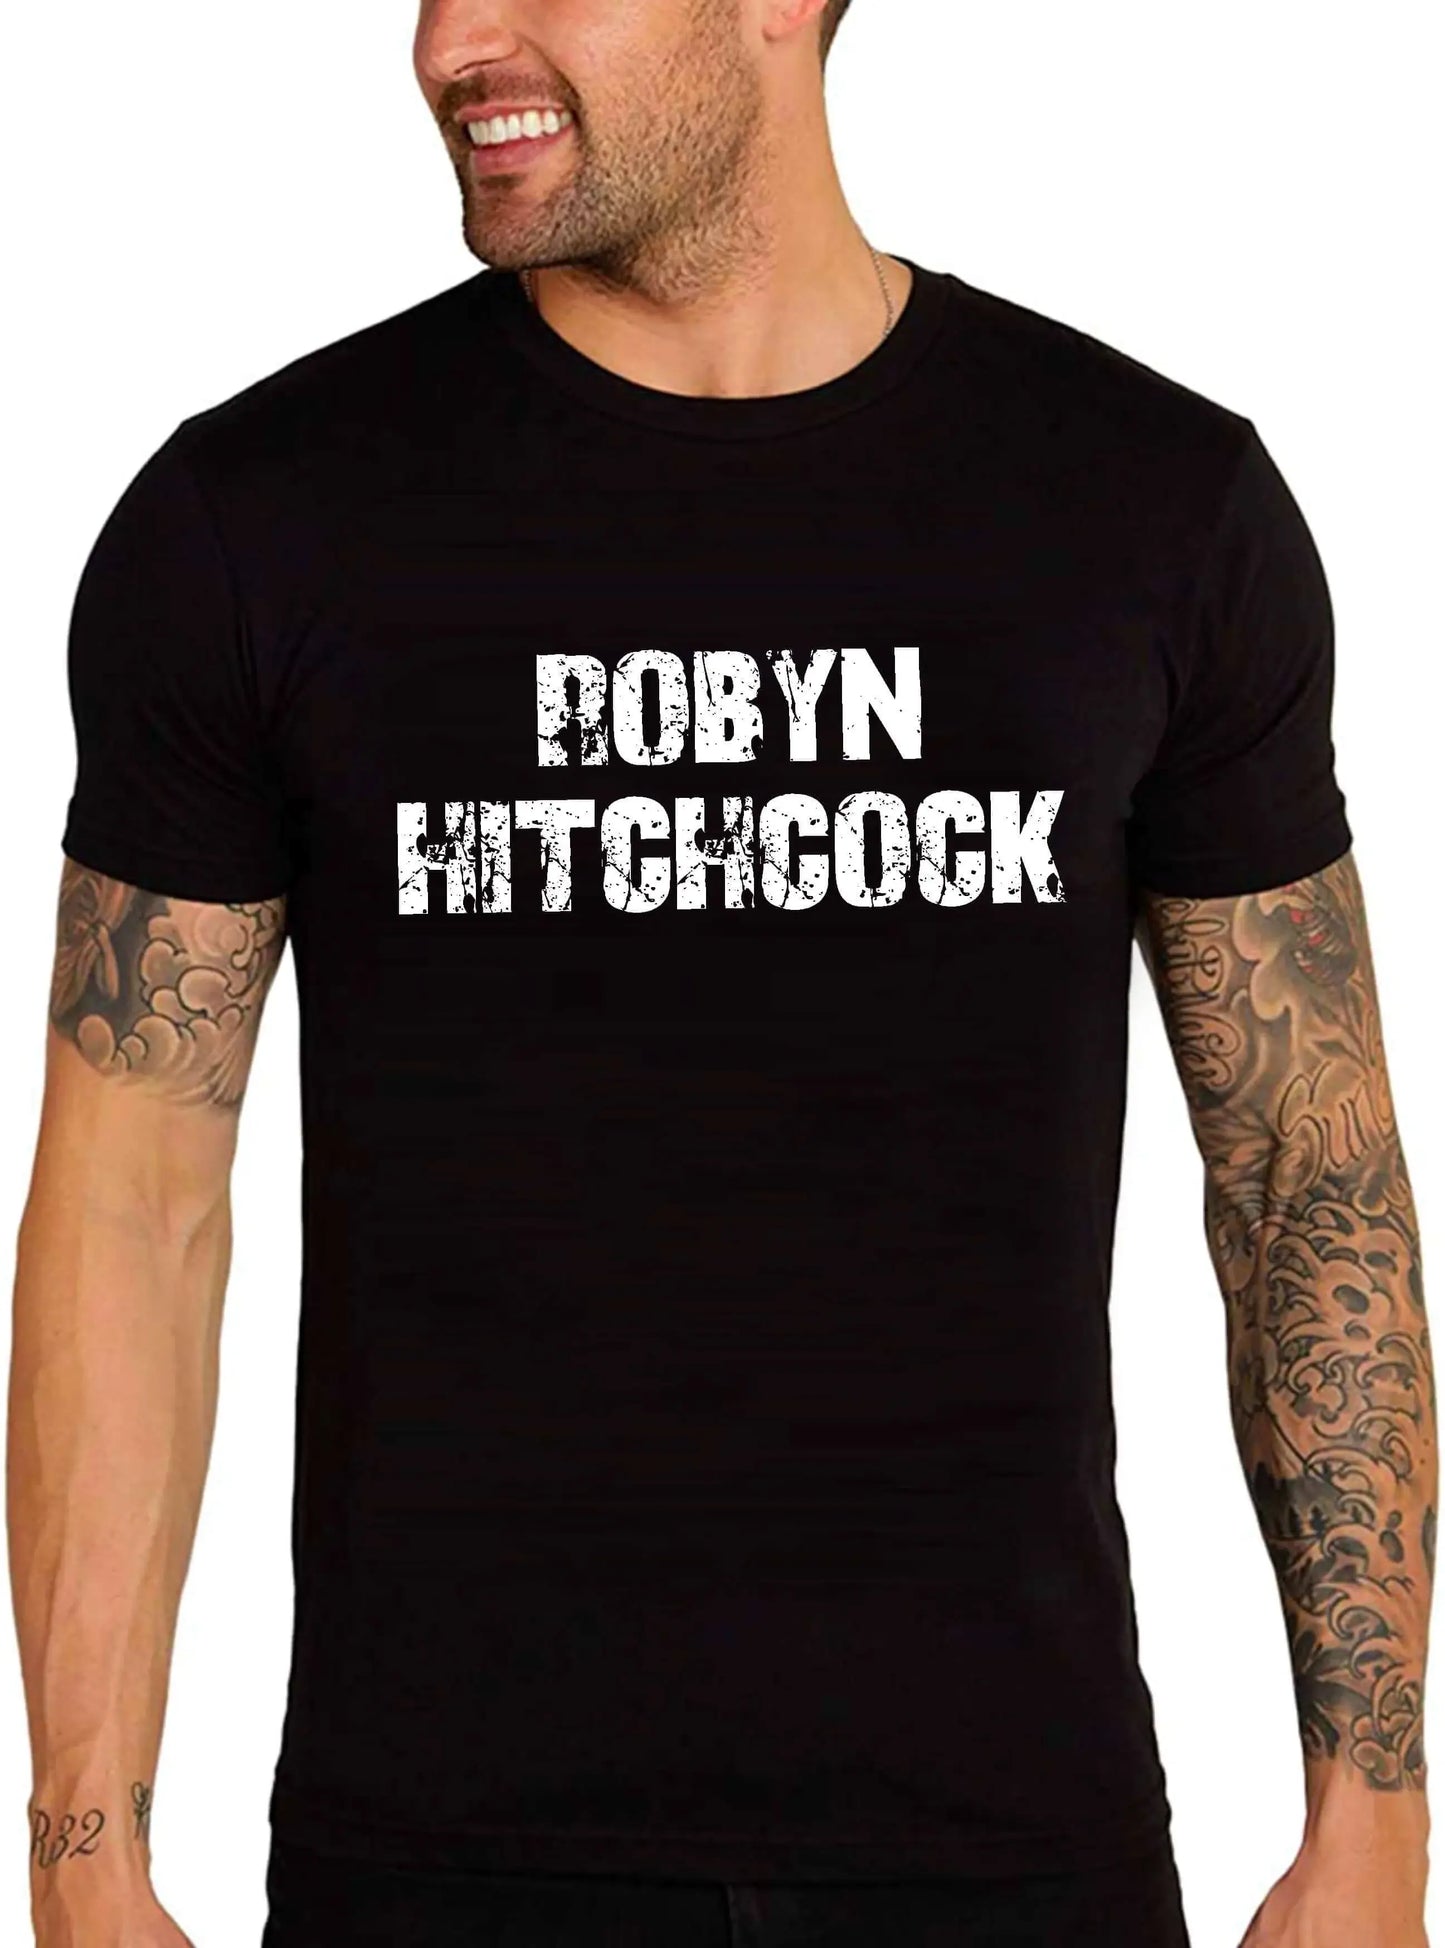 Men's Graphic T-Shirt Robyn Hitchcock Eco-Friendly Limited Edition Short Sleeve Tee-Shirt Vintage Birthday Gift Novelty